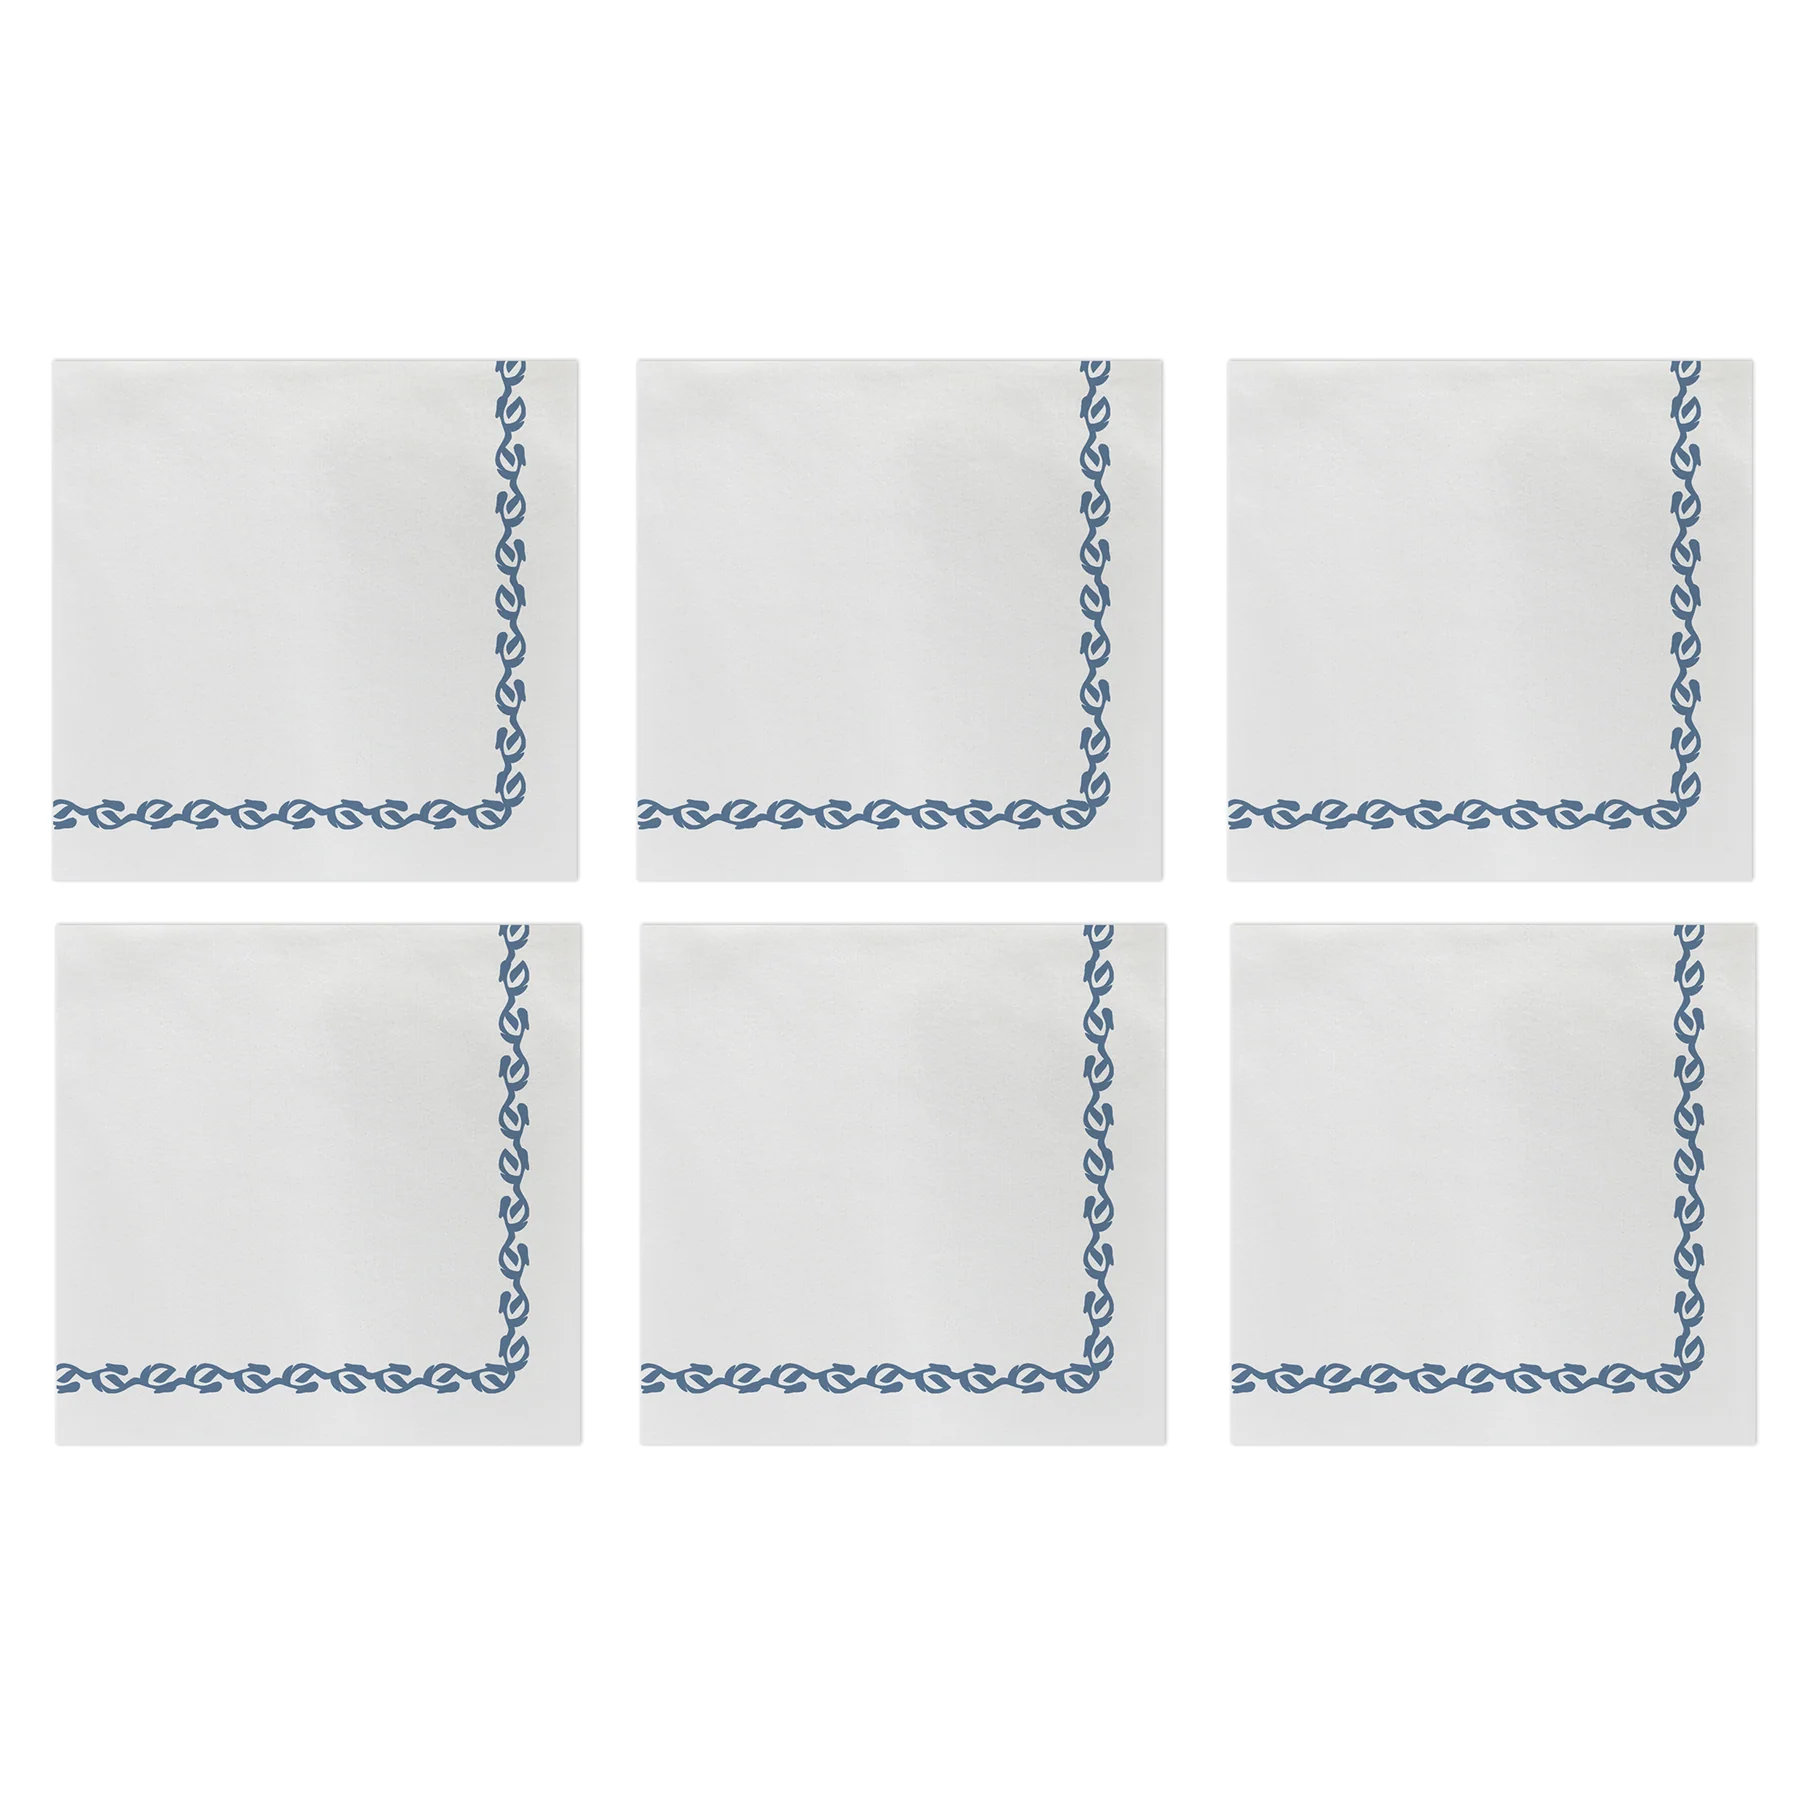 Vietri Papersoft Napkins Bianco Solid Dinner Napkins (Pack of 50)